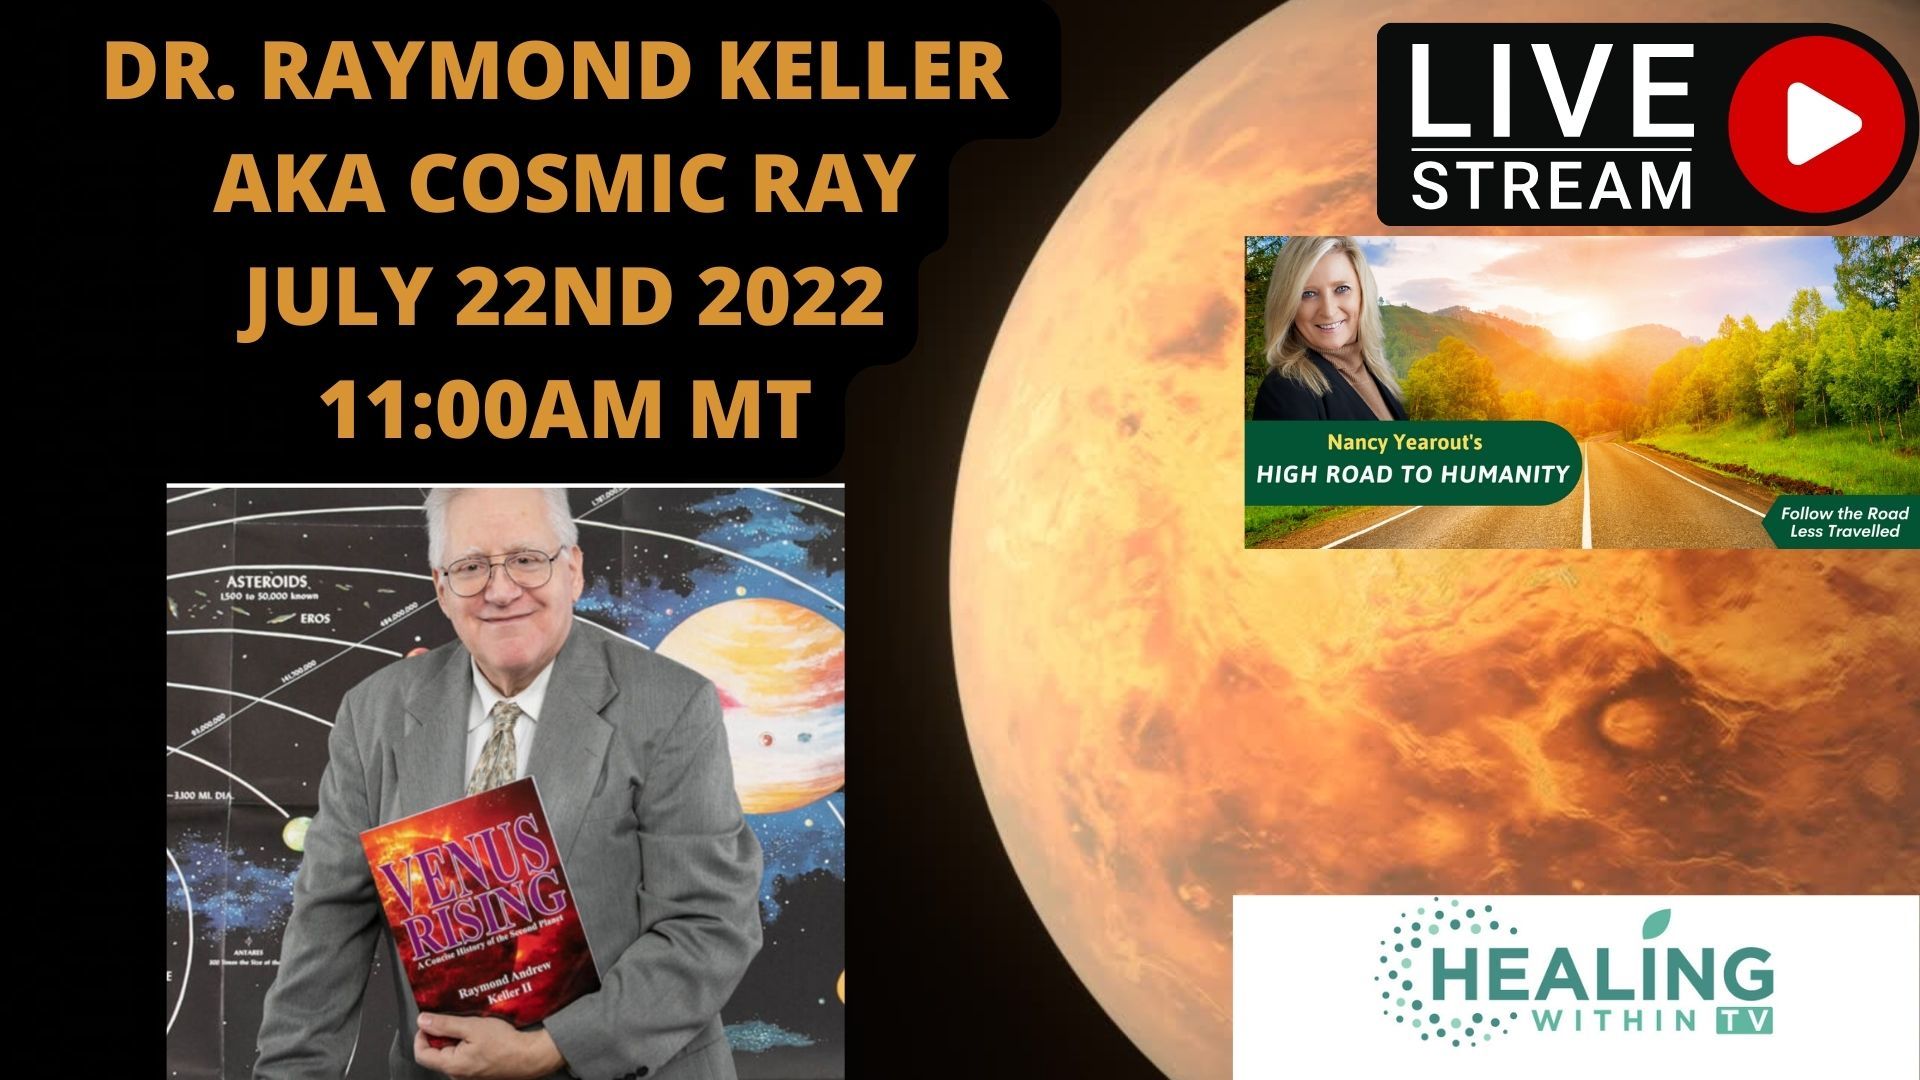 Dr. Raymond Keller A.K.A. Cosmic Ray Shares Details of Planet Venus